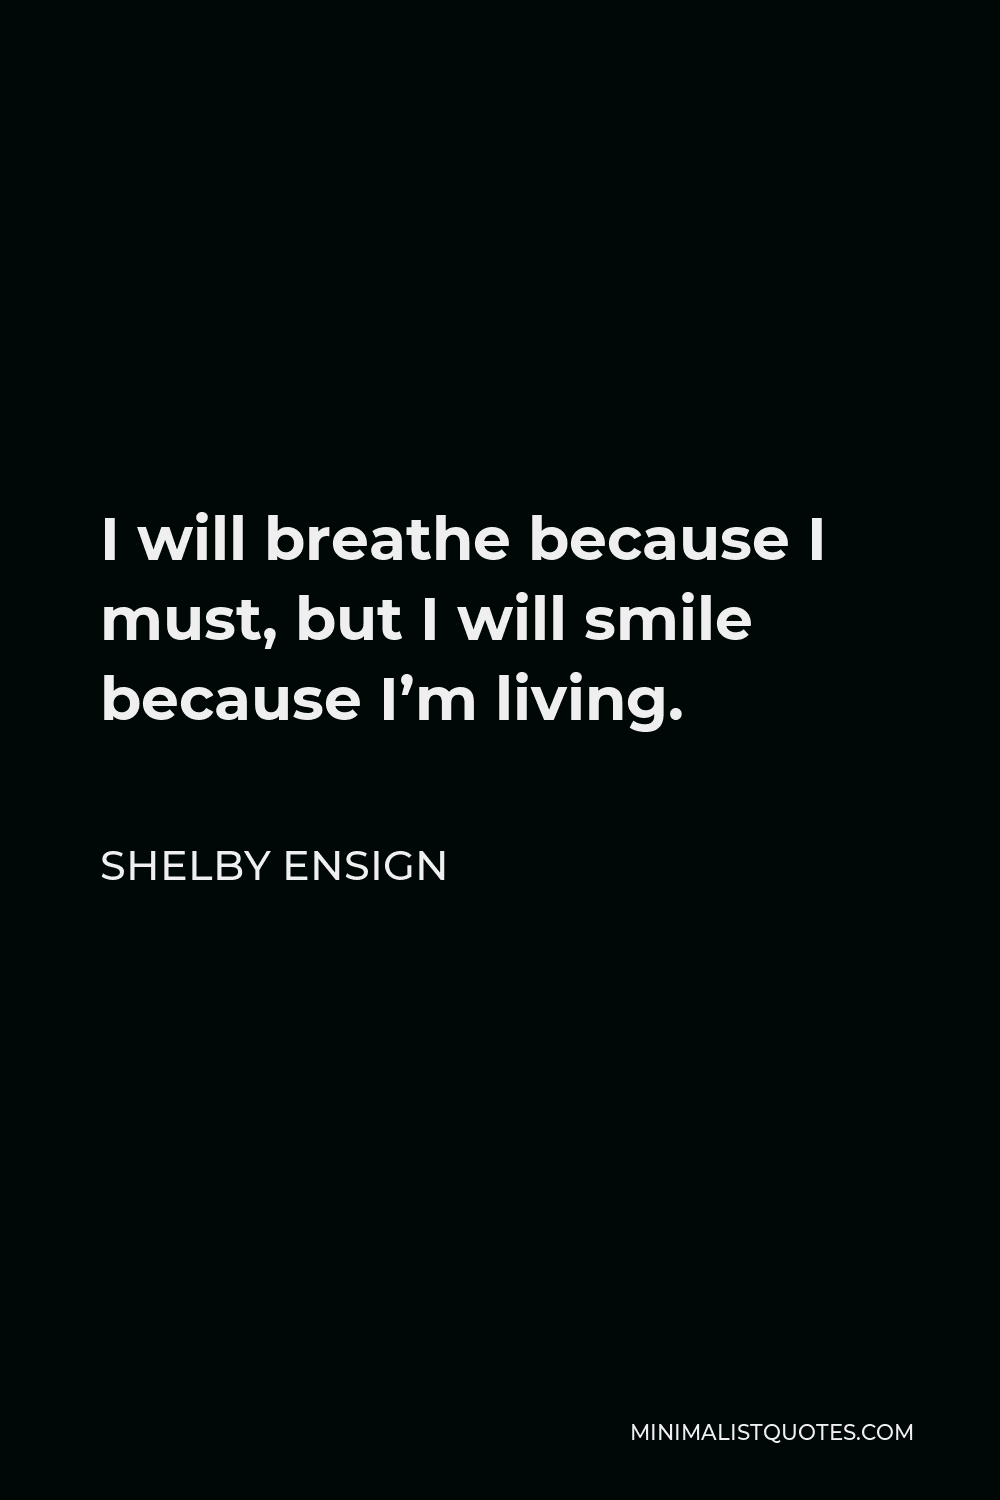 Shelby Ensign Quote - I will breathe because I must, but I will smile because I’m living.